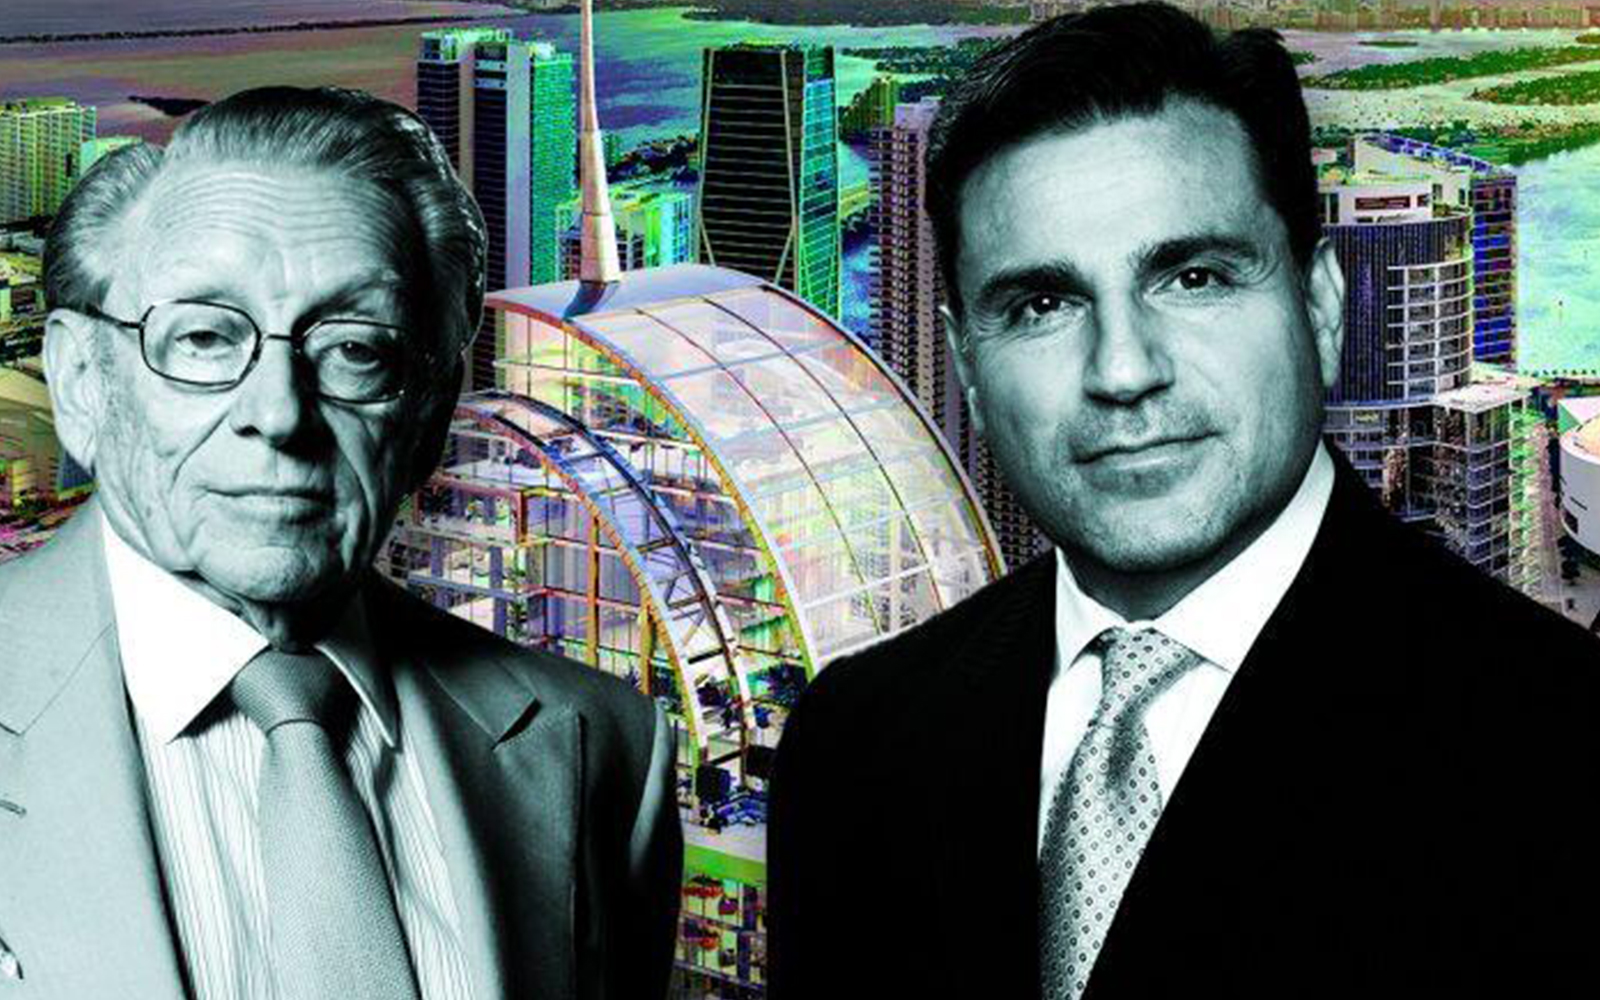 Miami Worldcenter developer nabs $340M financing for mixed-use tower, marking third largest construction